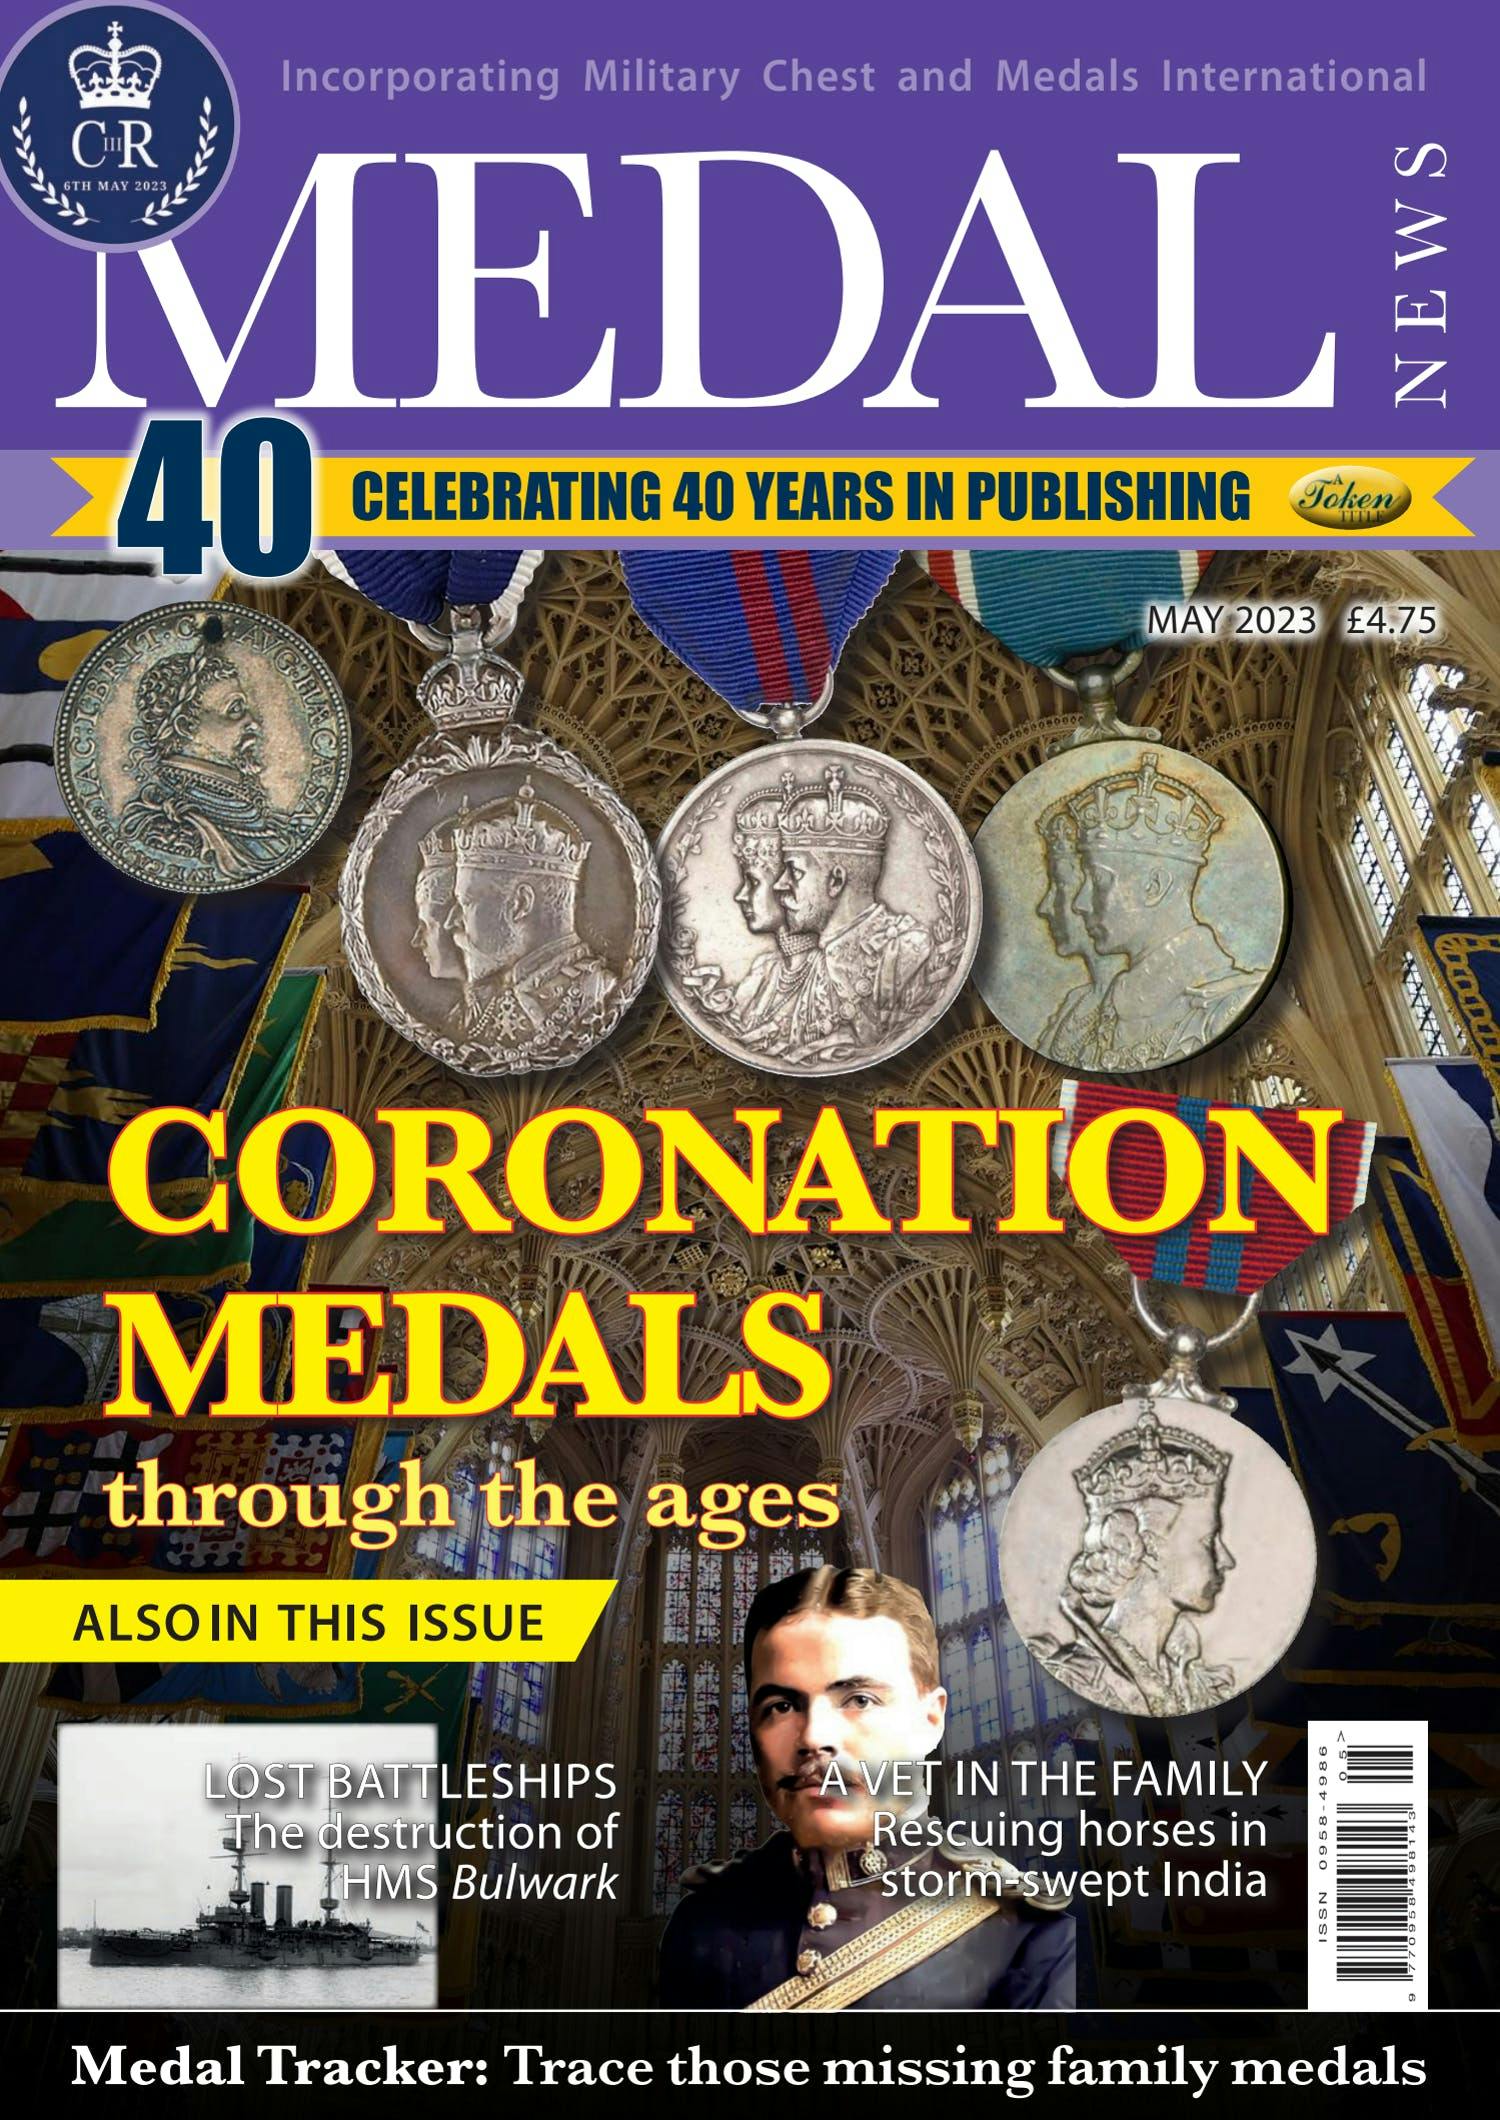 The front cover of Medal News, May 2023 - Volume 61, Number 5